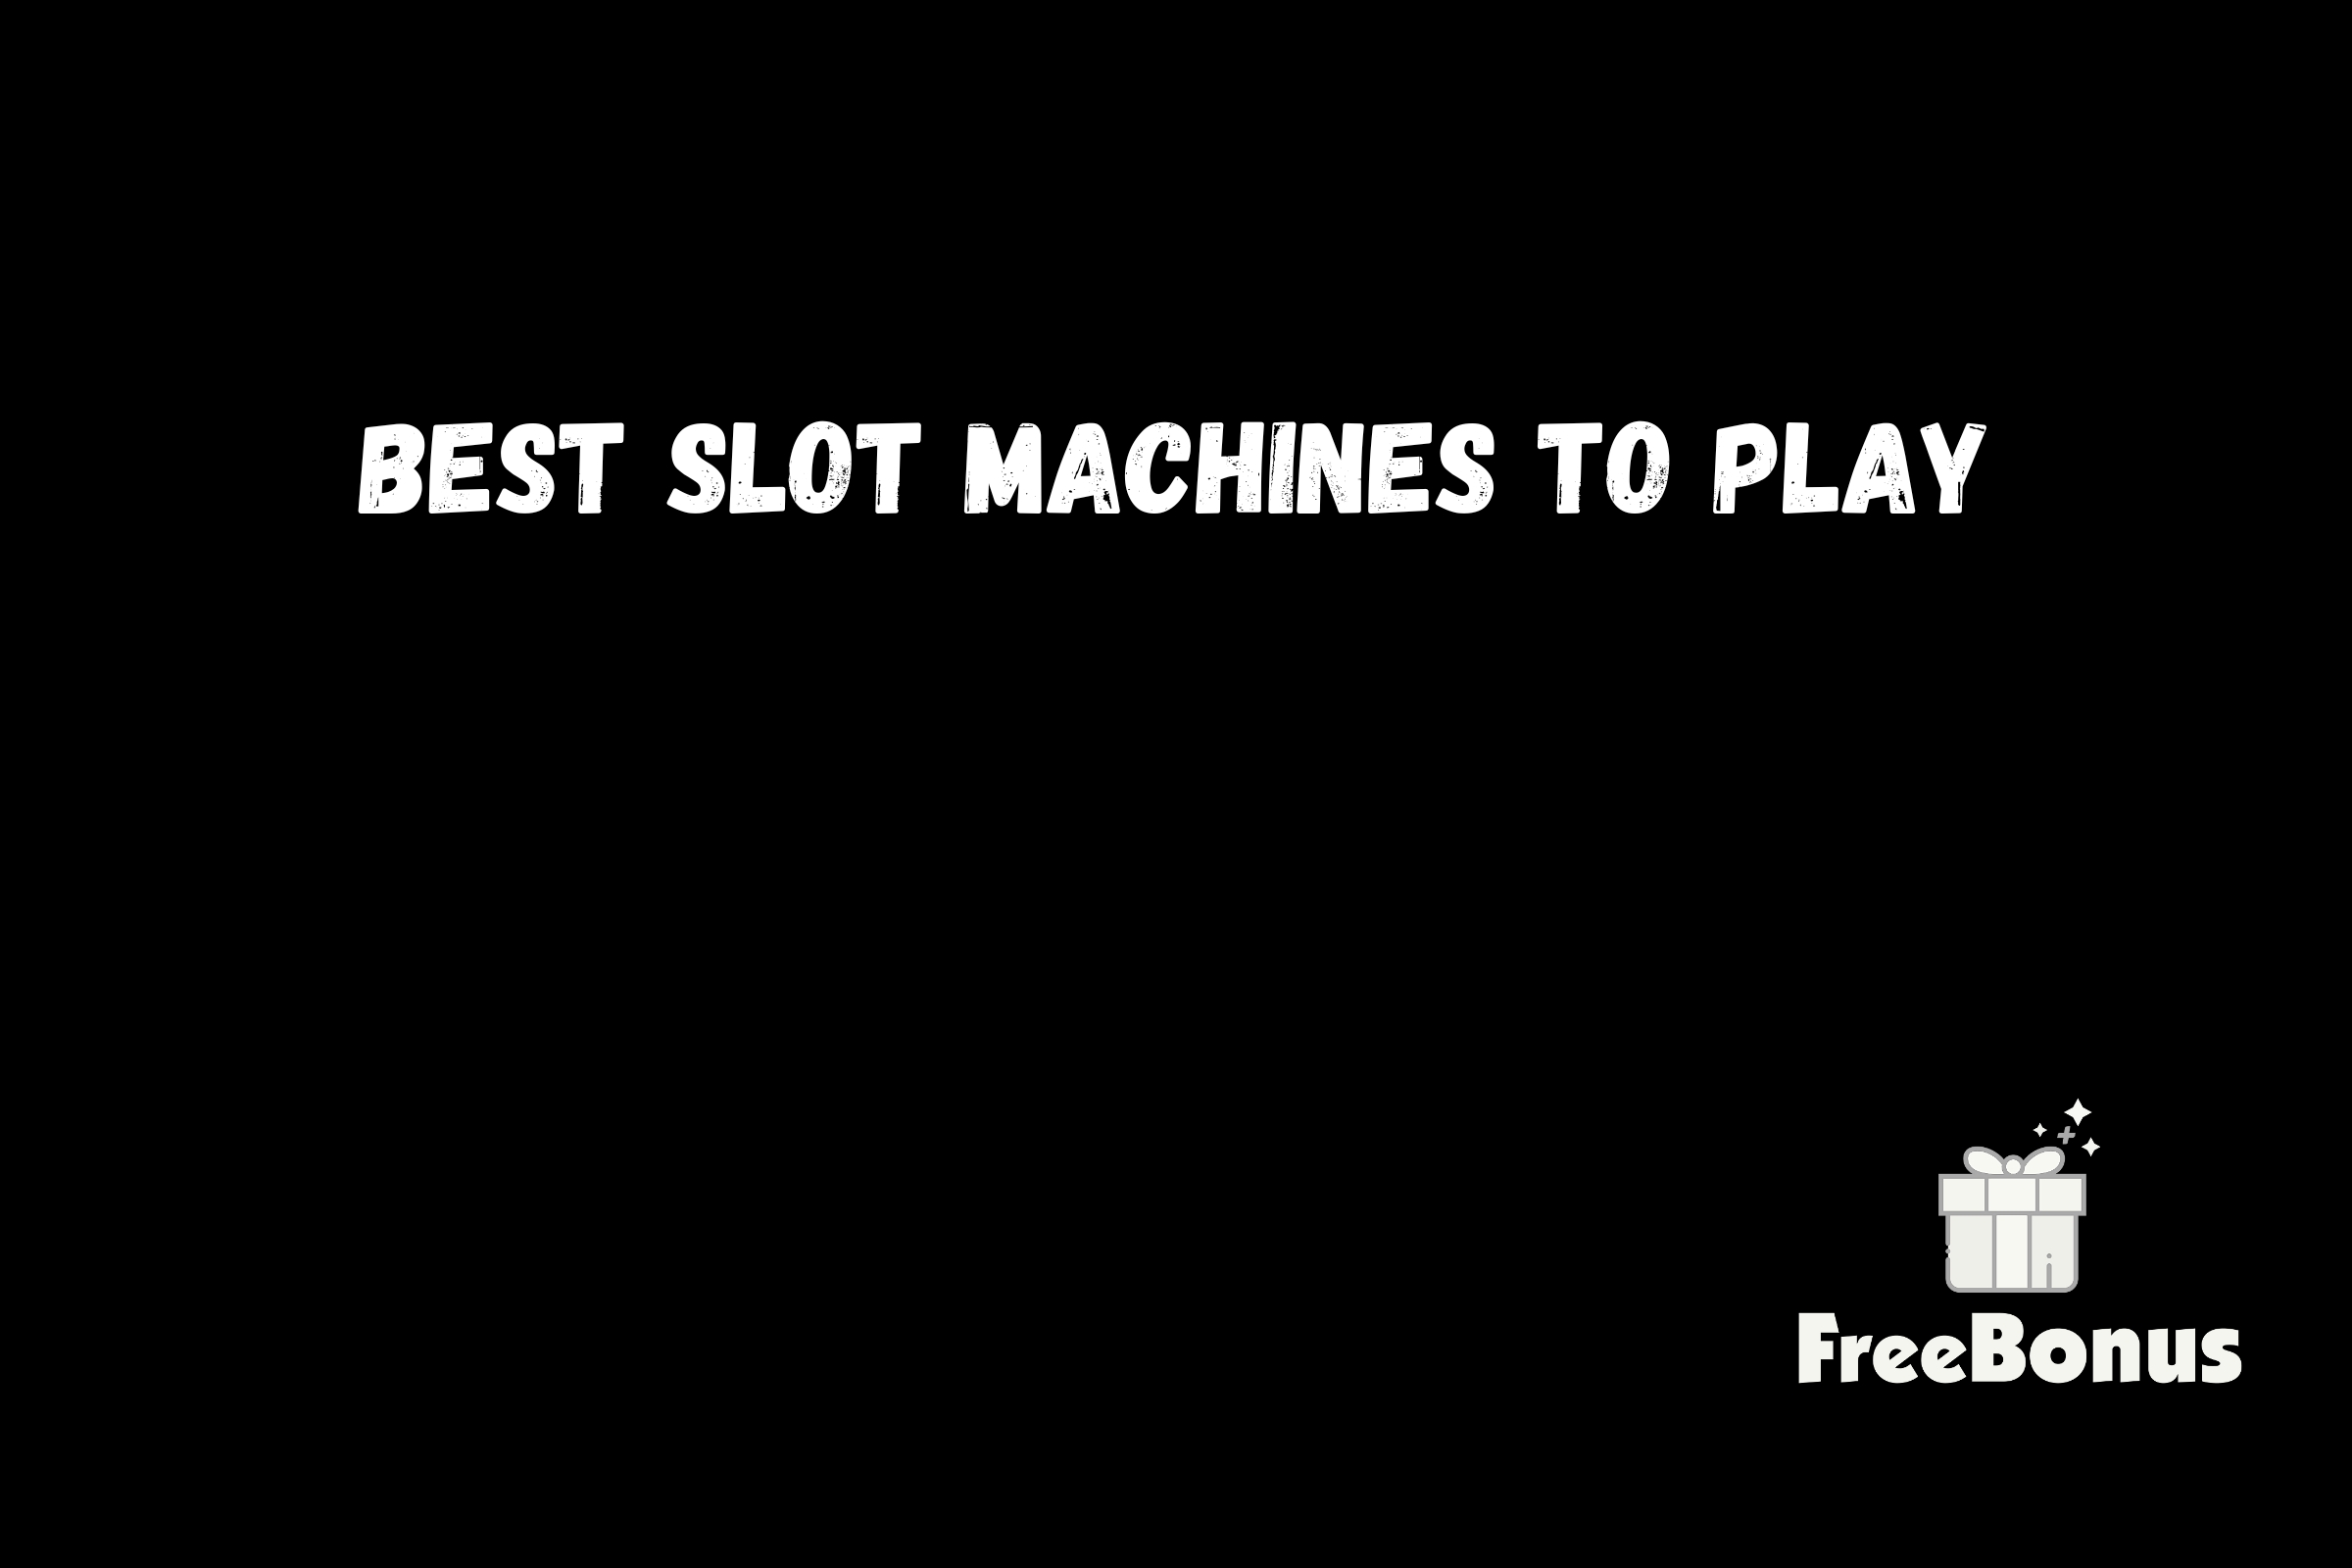 Best Slot Machines To Play